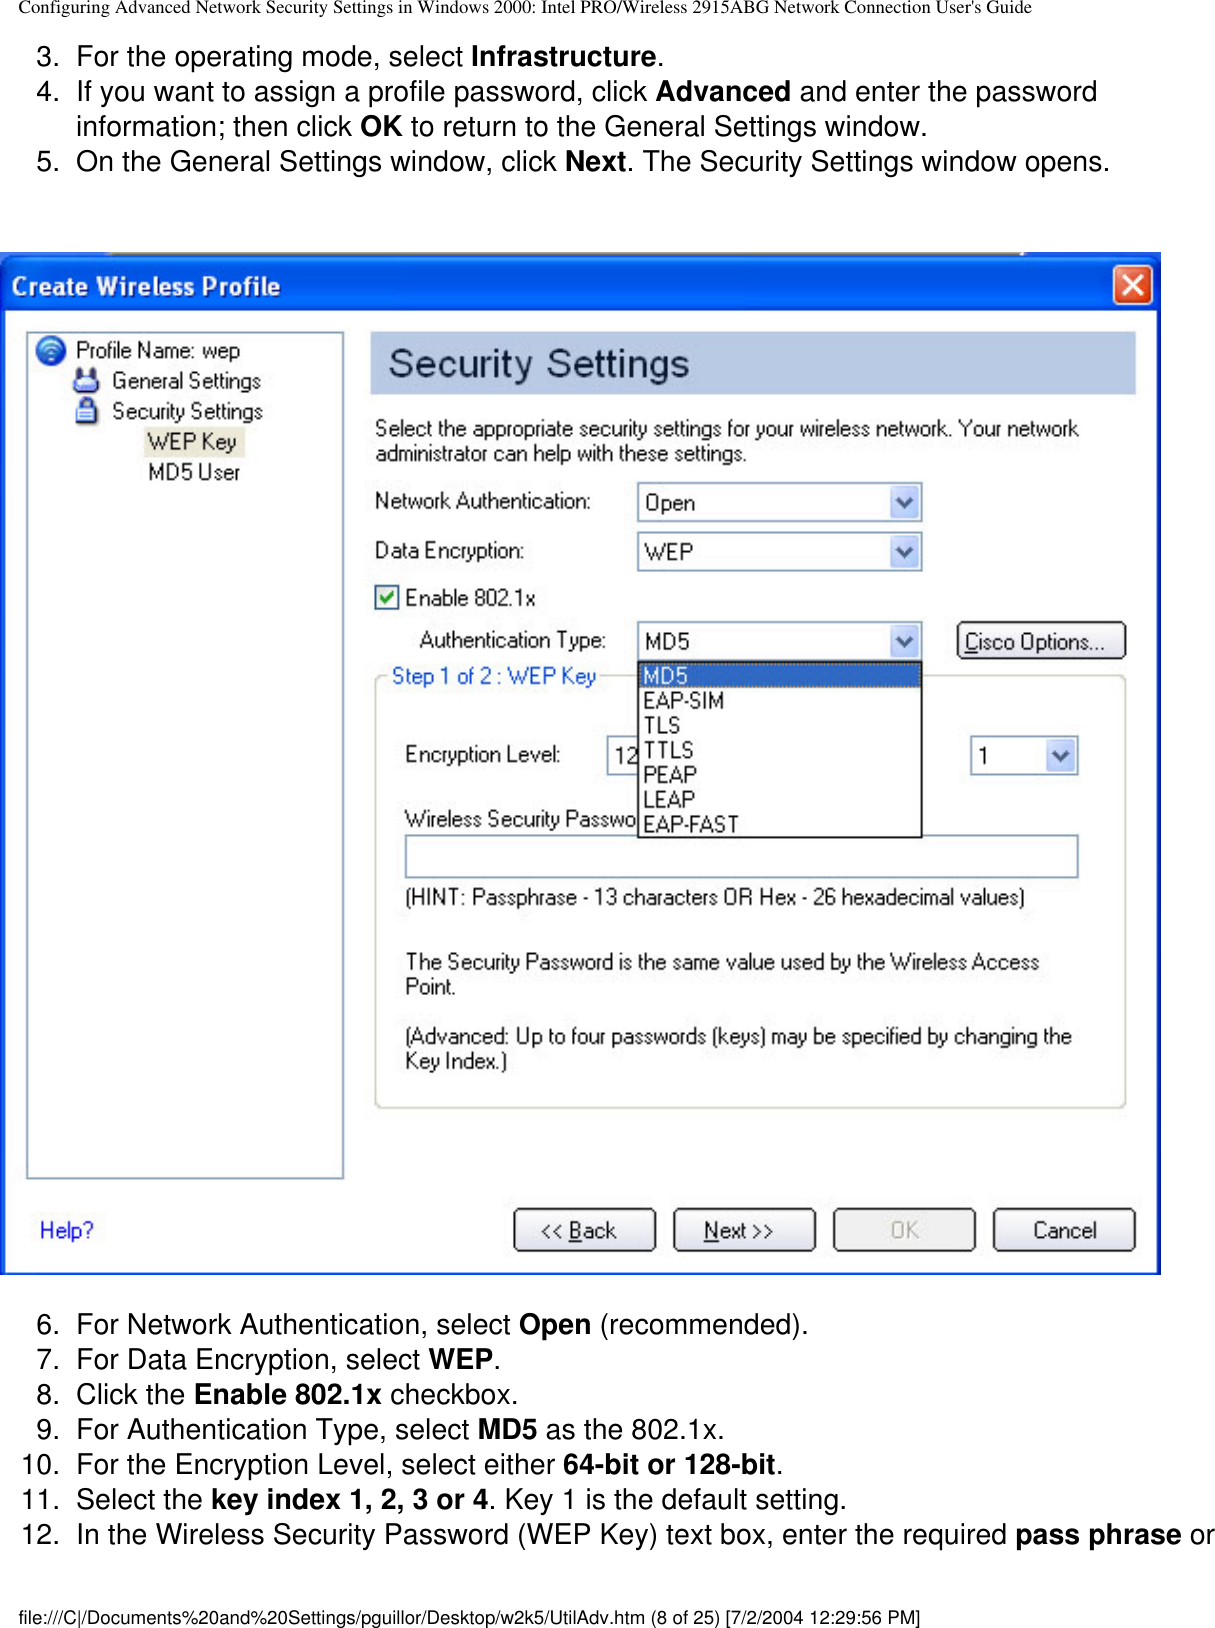 Configuring Advanced Network Security Settings in Windows 2000: Intel PRO/Wireless 2915ABG Network Connection User&apos;s Guide3.  For the operating mode, select Infrastructure.4.  If you want to assign a profile password, click Advanced and enter the password information; then click OK to return to the General Settings window.  5.  On the General Settings window, click Next. The Security Settings window opens.            6.  For Network Authentication, select Open (recommended).7.  For Data Encryption, select WEP. 8.  Click the Enable 802.1x checkbox.9.  For Authentication Type, select MD5 as the 802.1x.10.  For the Encryption Level, select either 64-bit or 128-bit.11.  Select the key index 1, 2, 3 or 4. Key 1 is the default setting.12.  In the Wireless Security Password (WEP Key) text box, enter the required pass phrase or file:///C|/Documents%20and%20Settings/pguillor/Desktop/w2k5/UtilAdv.htm (8 of 25) [7/2/2004 12:29:56 PM]